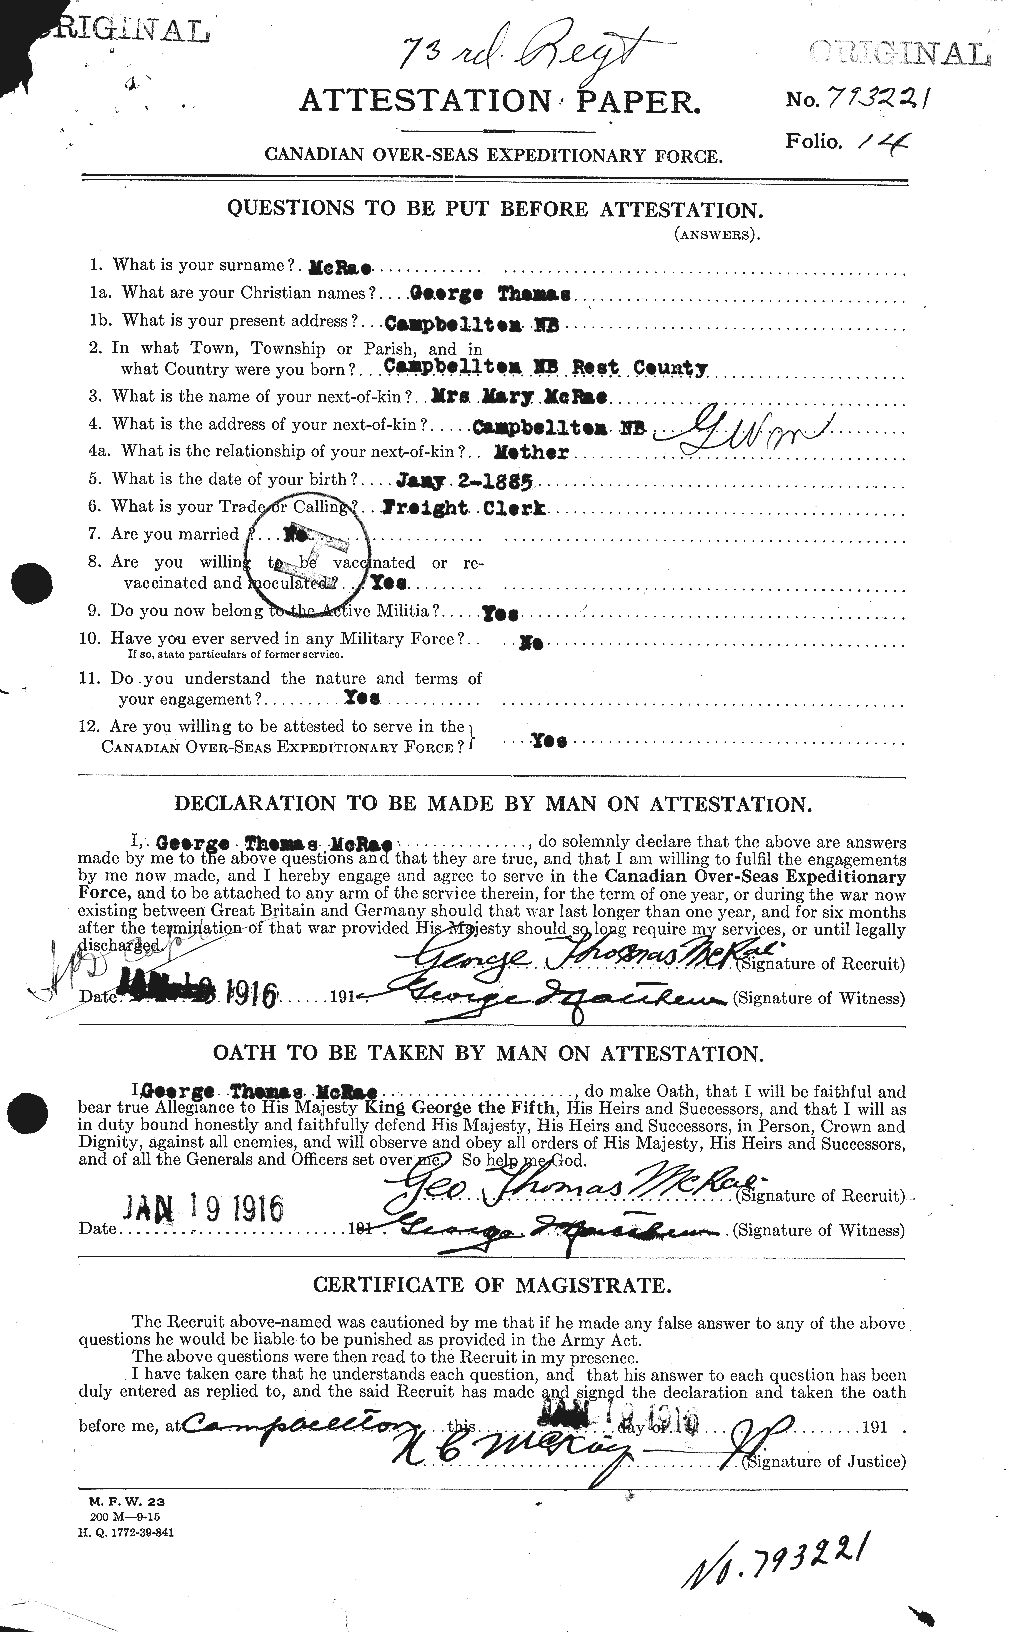 Personnel Records of the First World War - CEF 542736a